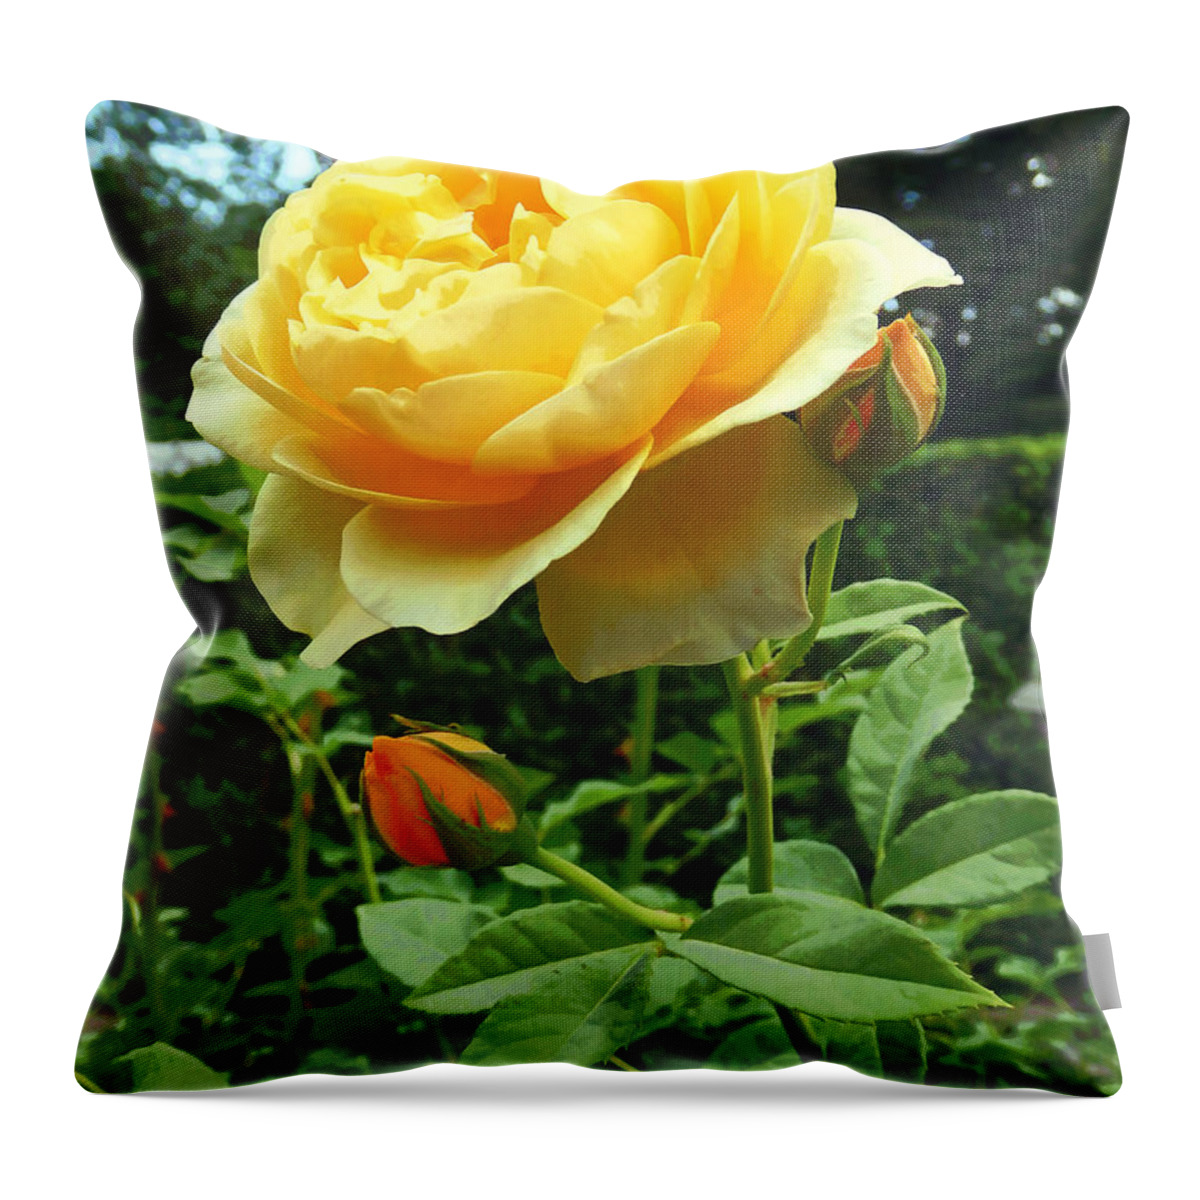 Rose Throw Pillow featuring the photograph Yellow Rose and Buds by Susan Savad